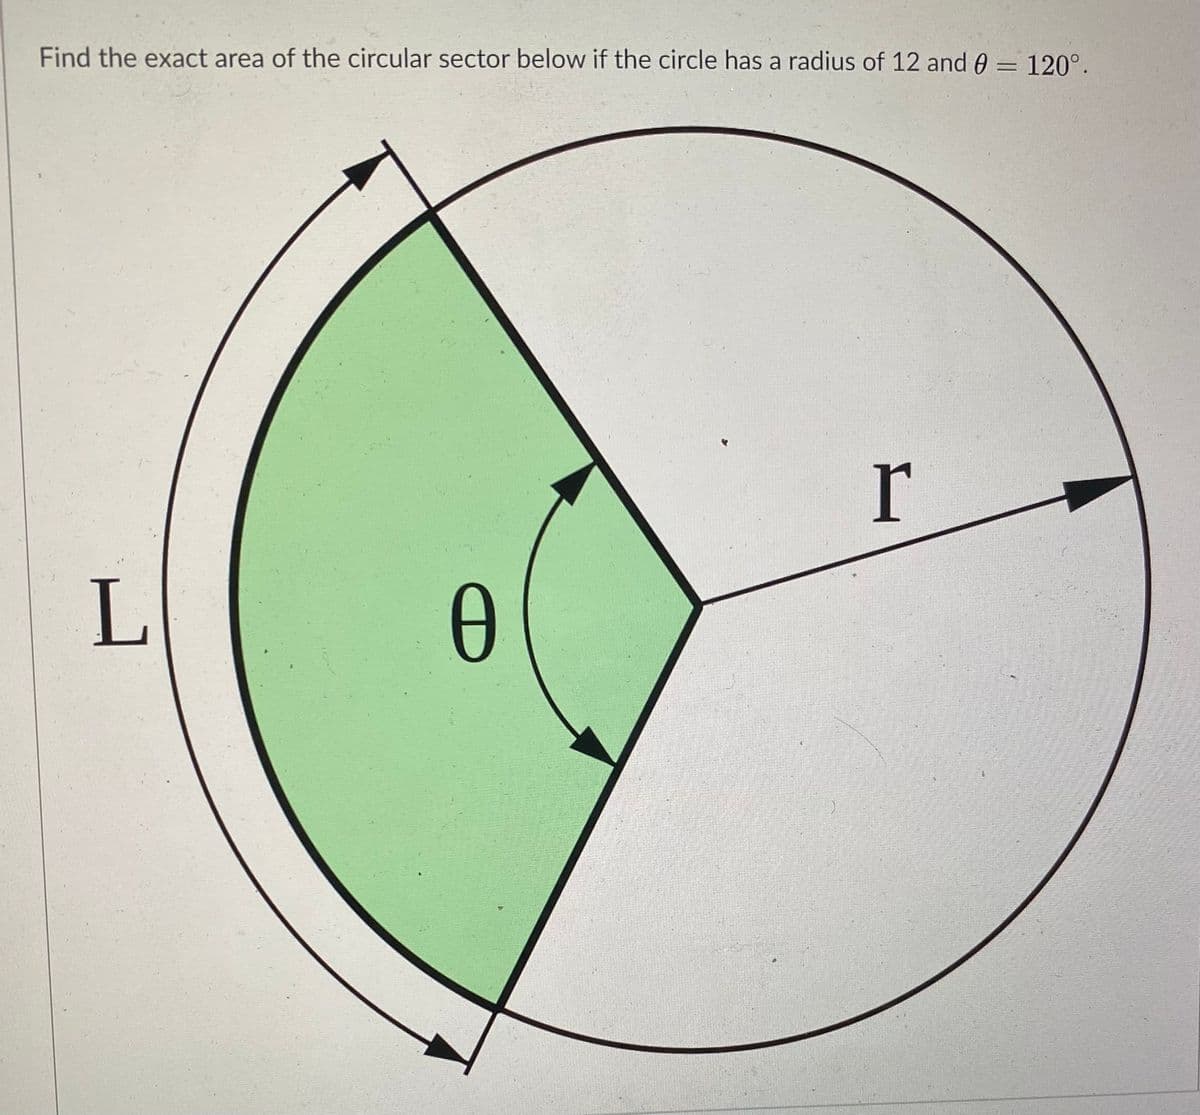 Find the exact area of the circular sector below if the circle has a radius of 12 and 0 = 120°.
r
L
0
